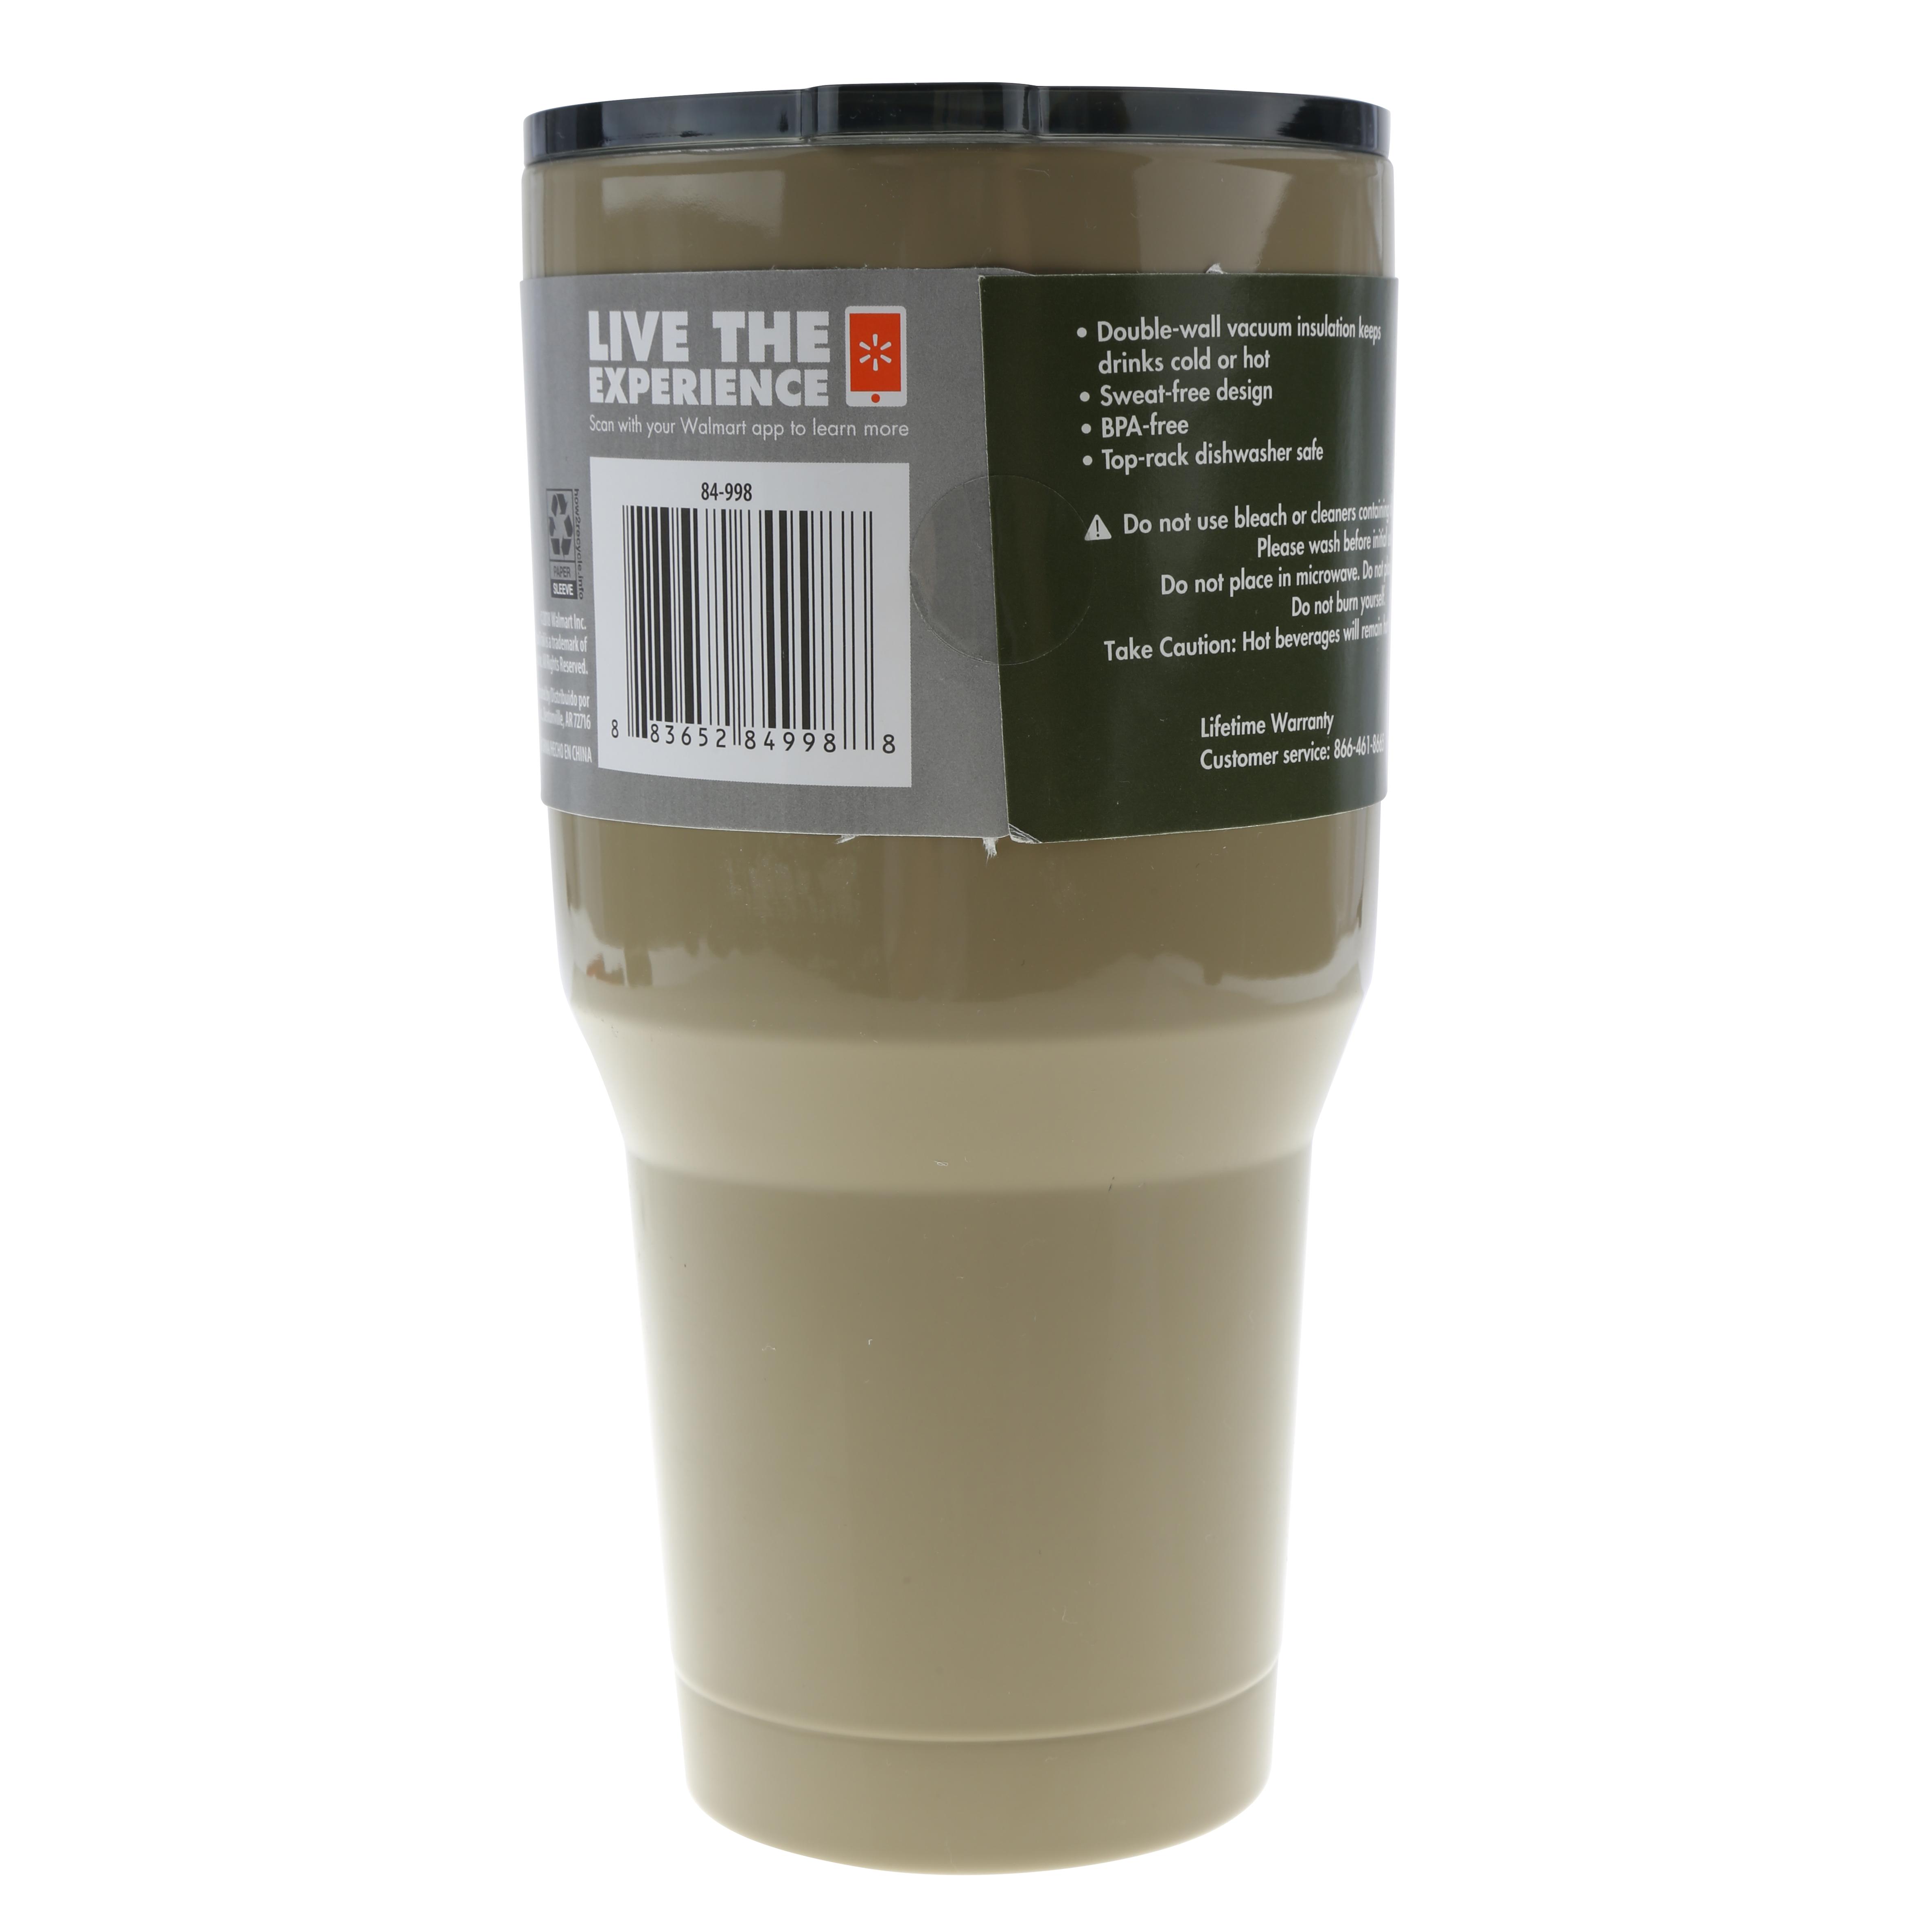 Ozark Trail 30-Ounce Double-wall, Vacuum-sealed Stainless Steel Tumbler, Tan - image 5 of 5